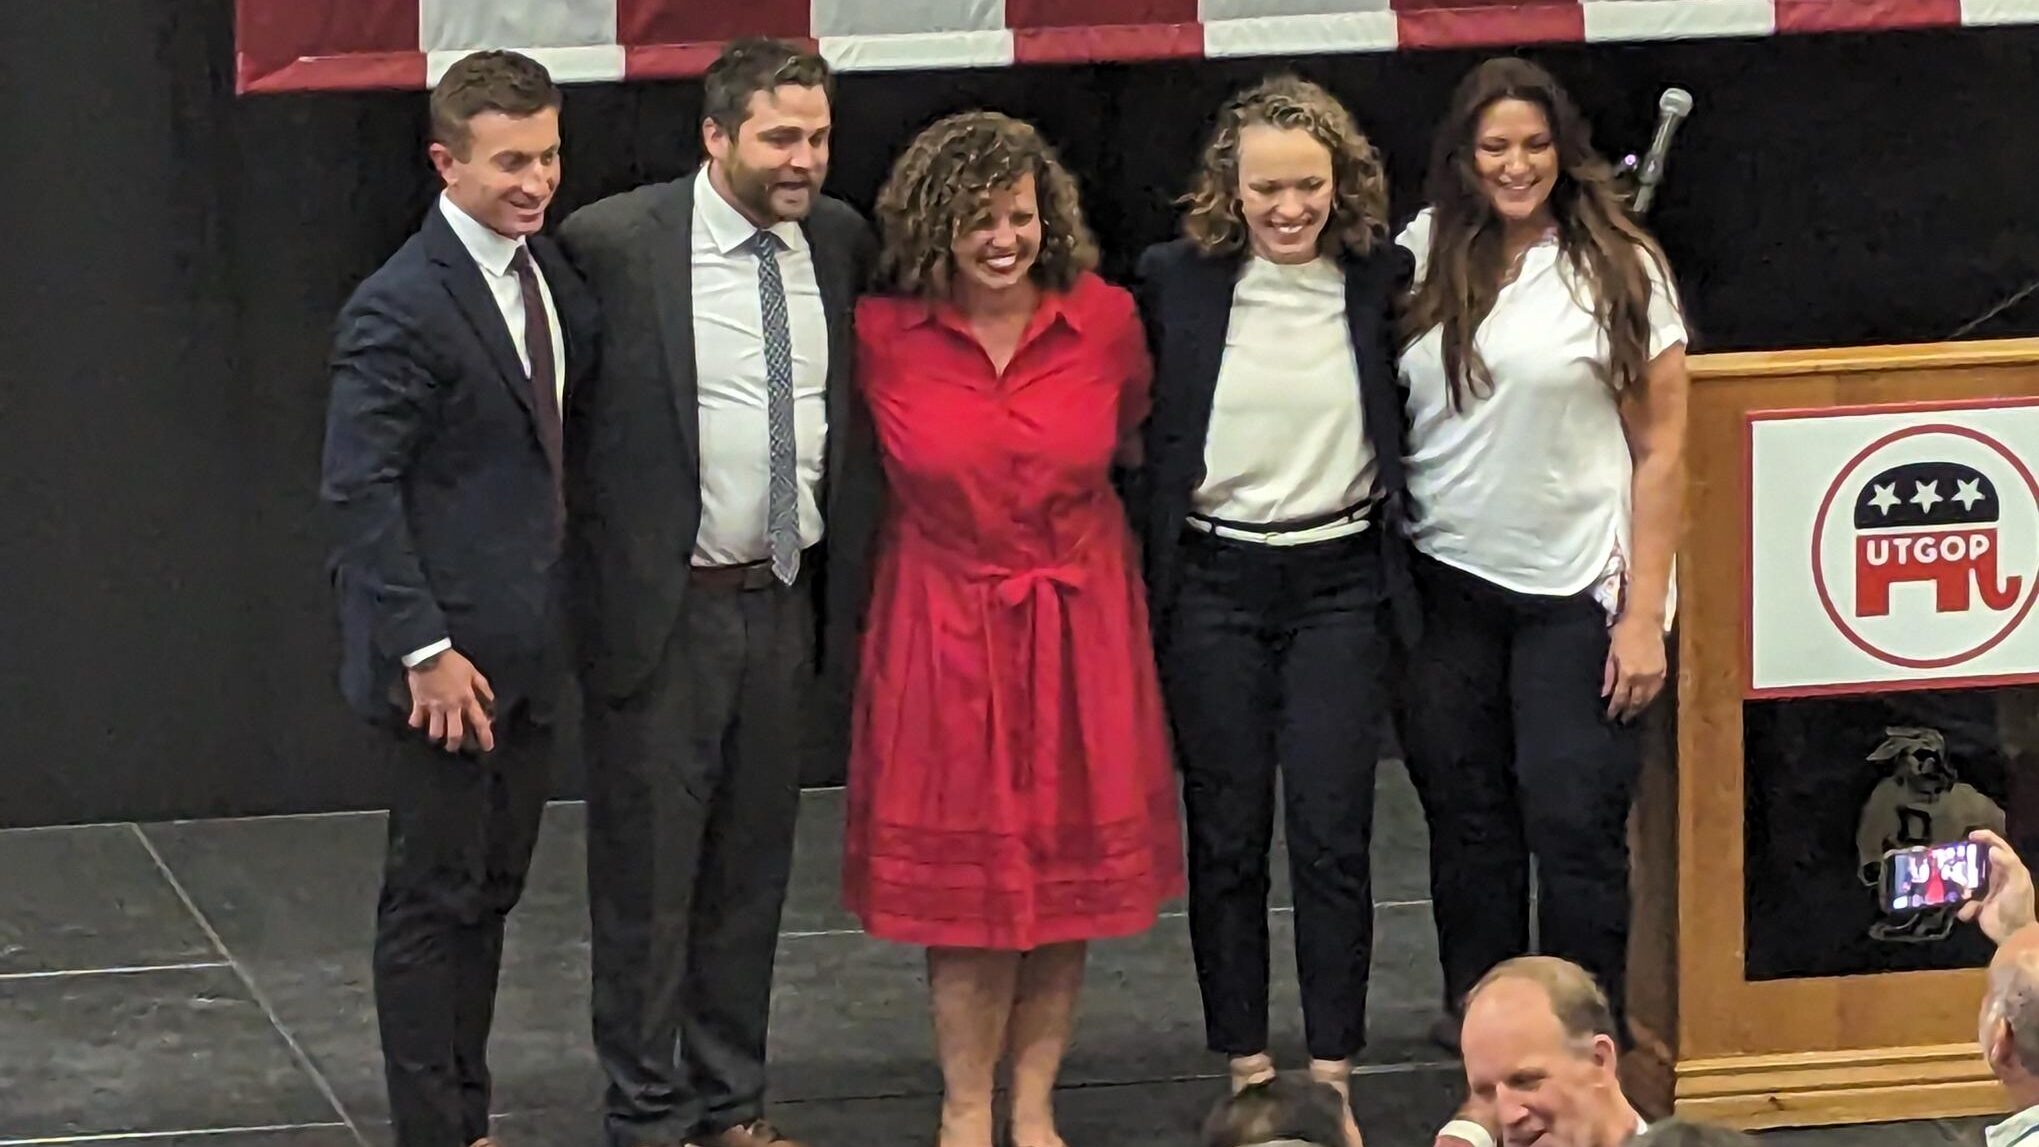 Utah Congressional 2nd District candidate Celeste Maloy, center, 
won the Utah GOP nomination in th...